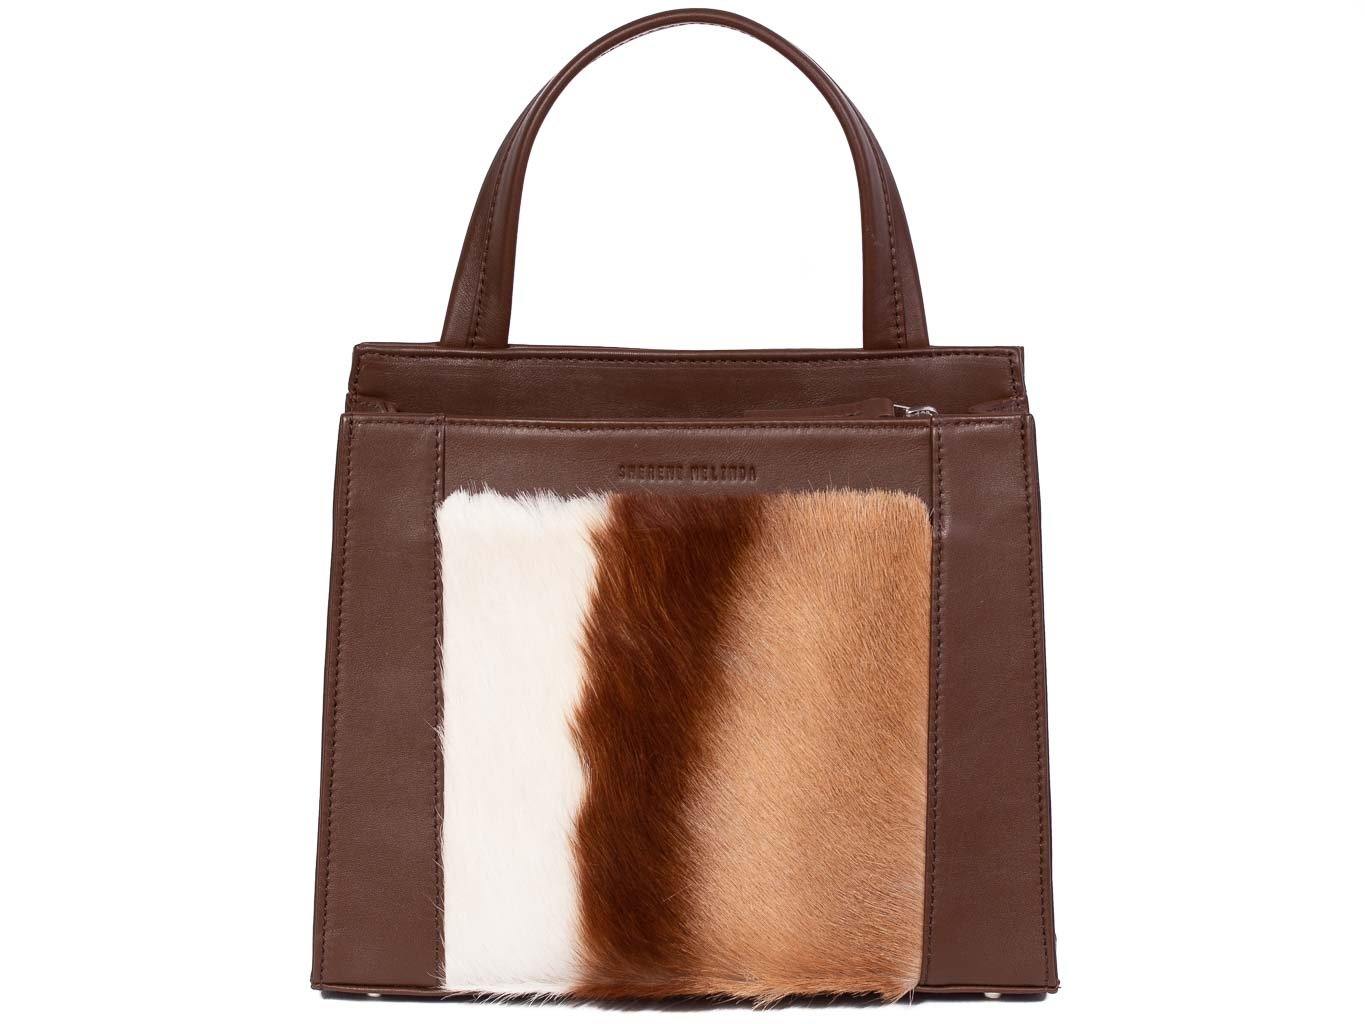 Top Handle Springbok Handbag in Cocoa Brown with a stripe feature by Sherene Melinda front